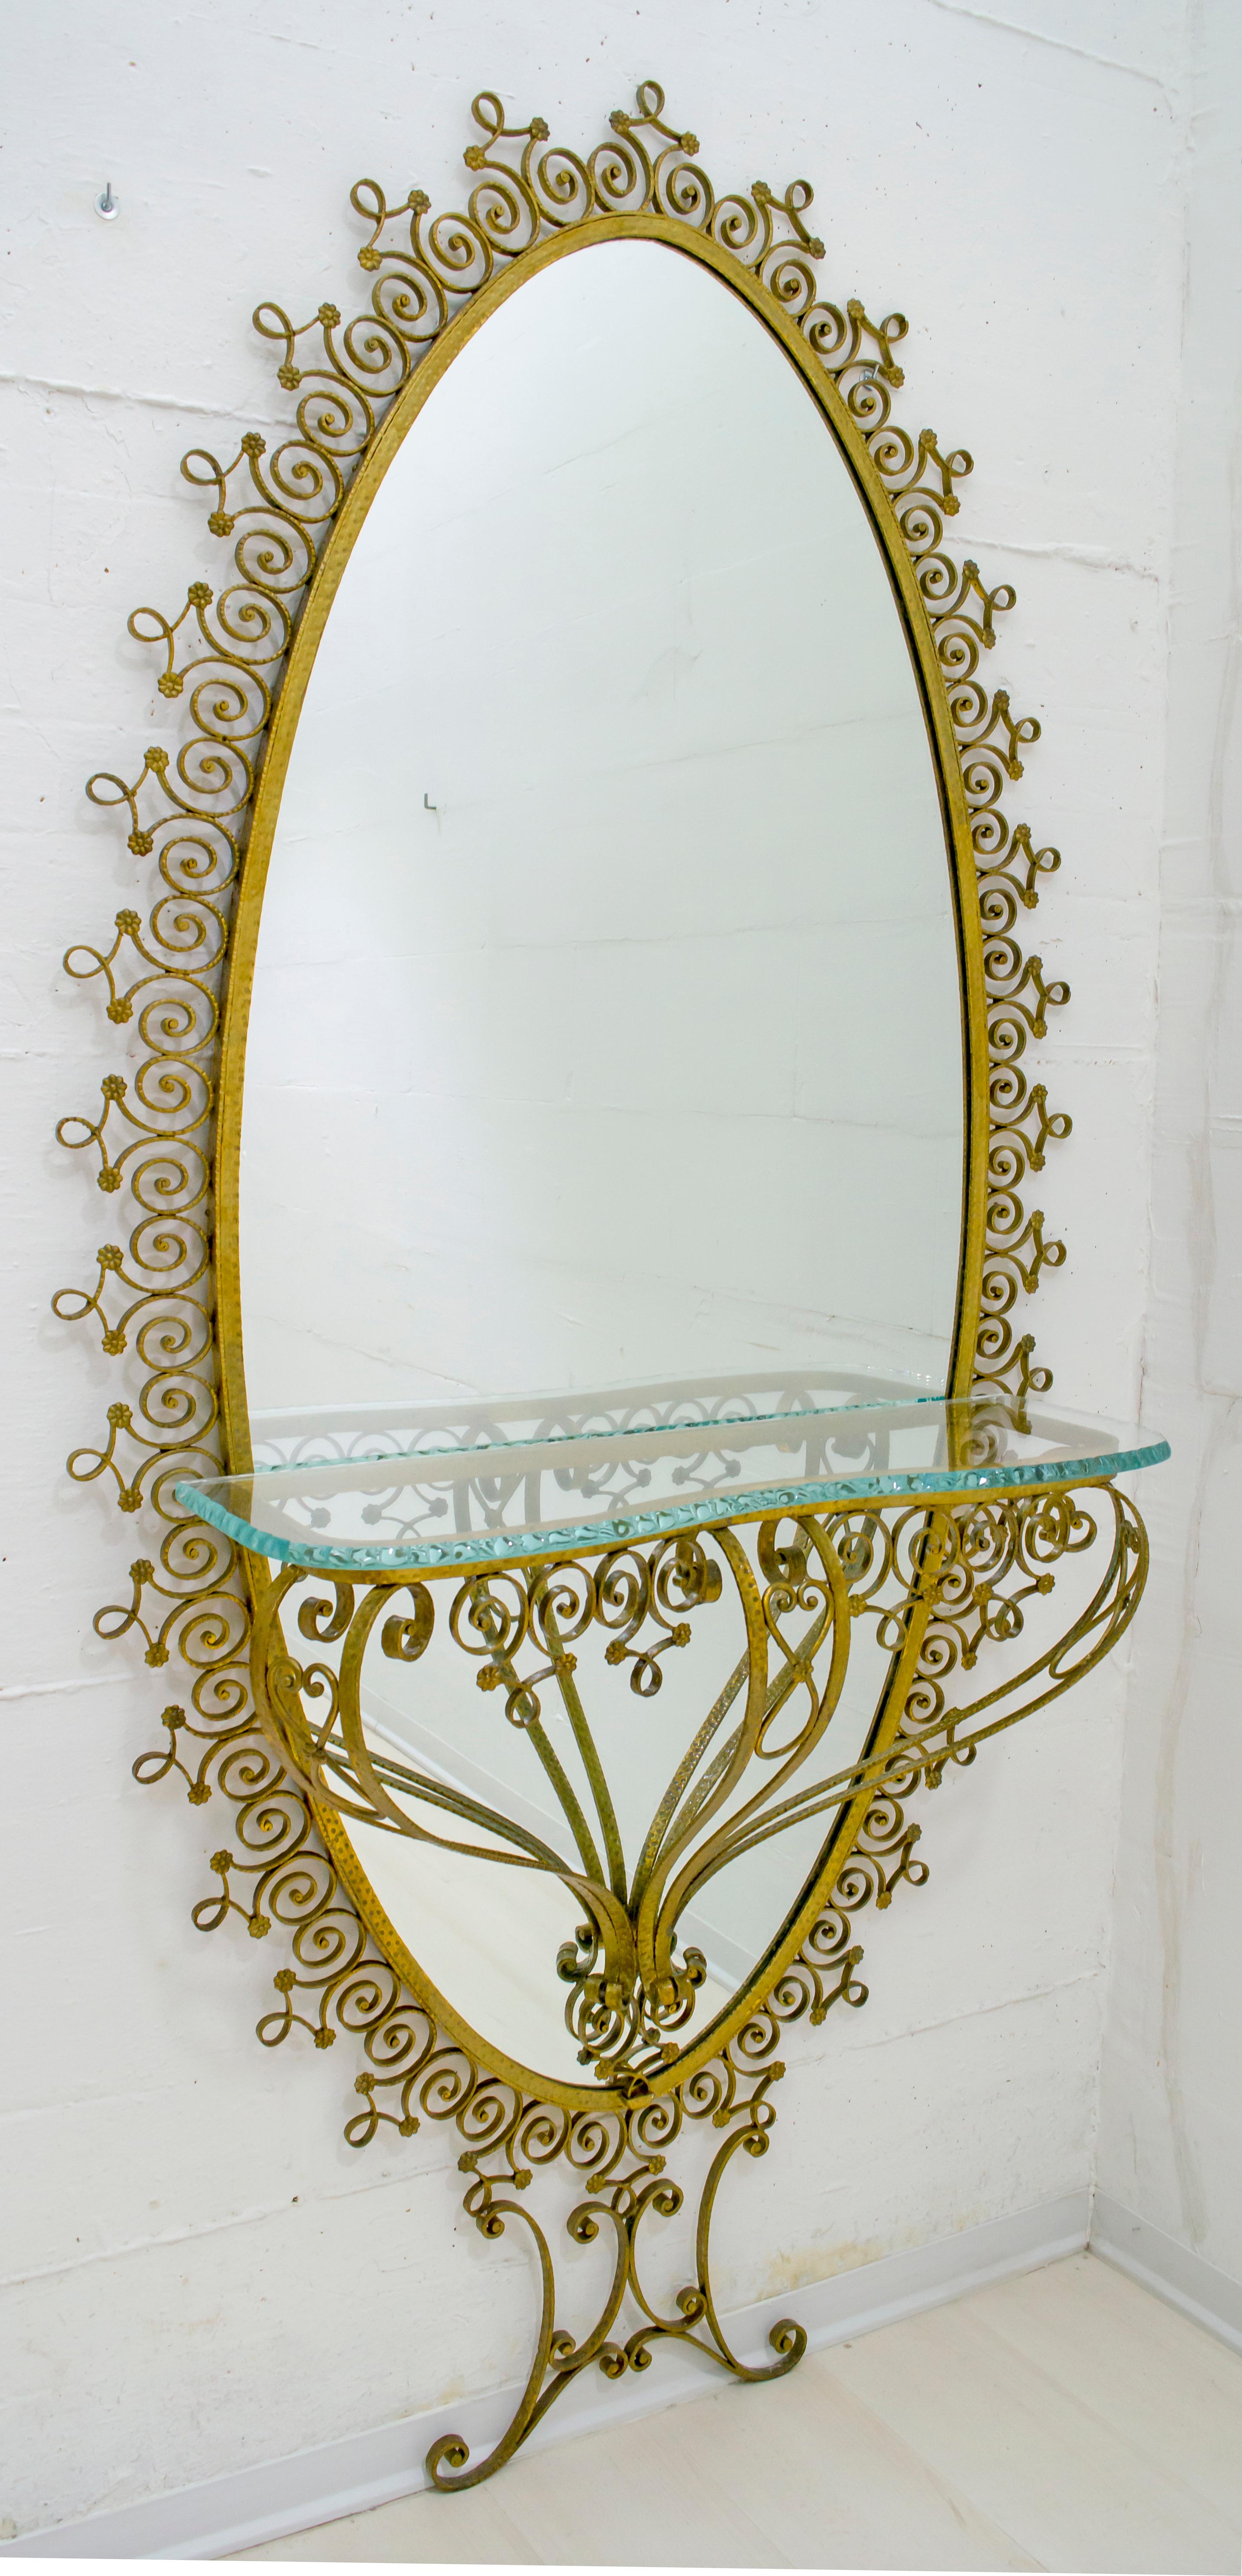 This large oval mirror with a mounted console has a gilded wrought iron frame and was designed by Pier Luigi Colli. It can be installed without the console, mirror and console separately
the top is in hand chiselled crystal

The company Colli was